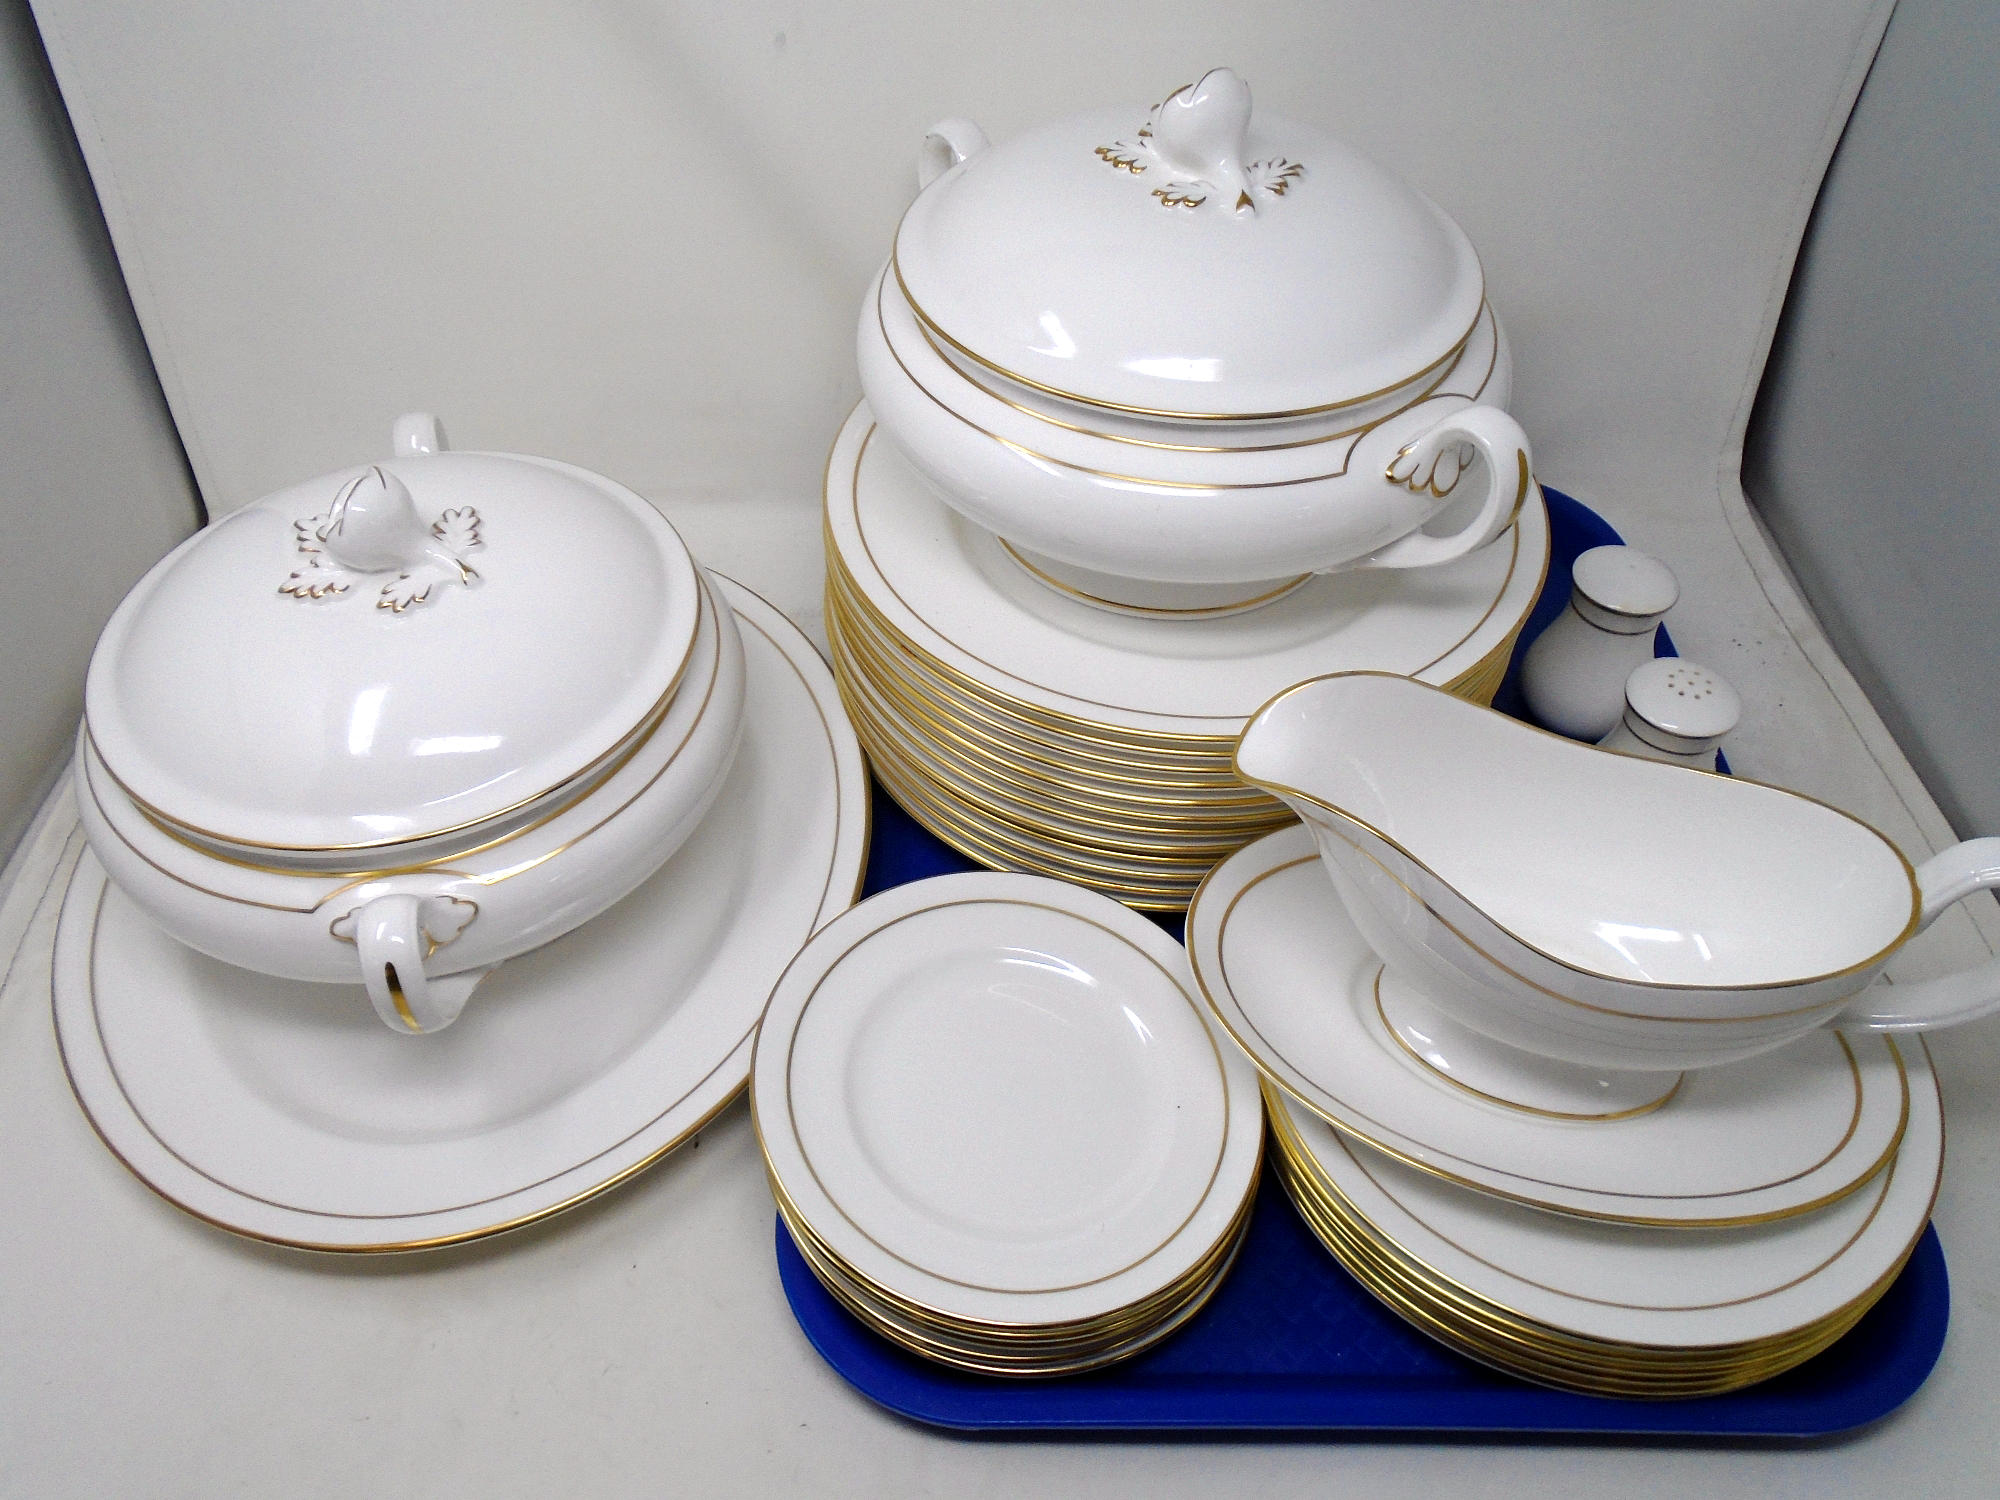 A set of 32 pieces of Royal Worcester Contessa white and gilt dinner ware.